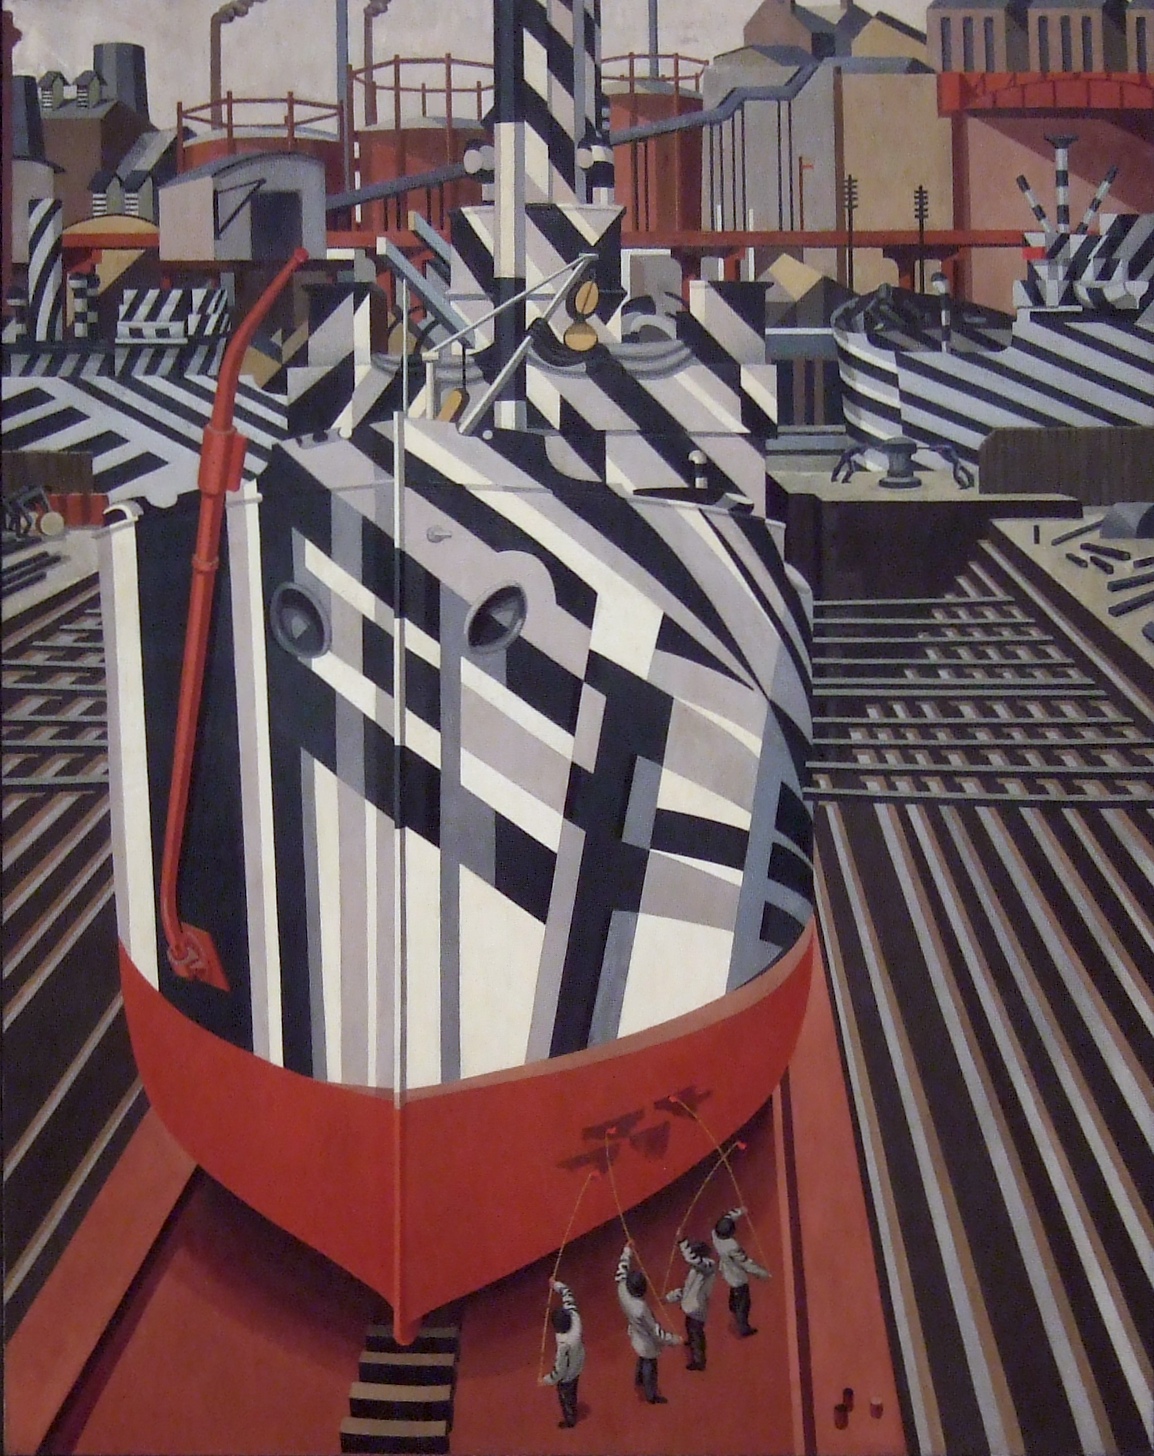 Dazzle-ships in Drydock at Liverpool, 1919.